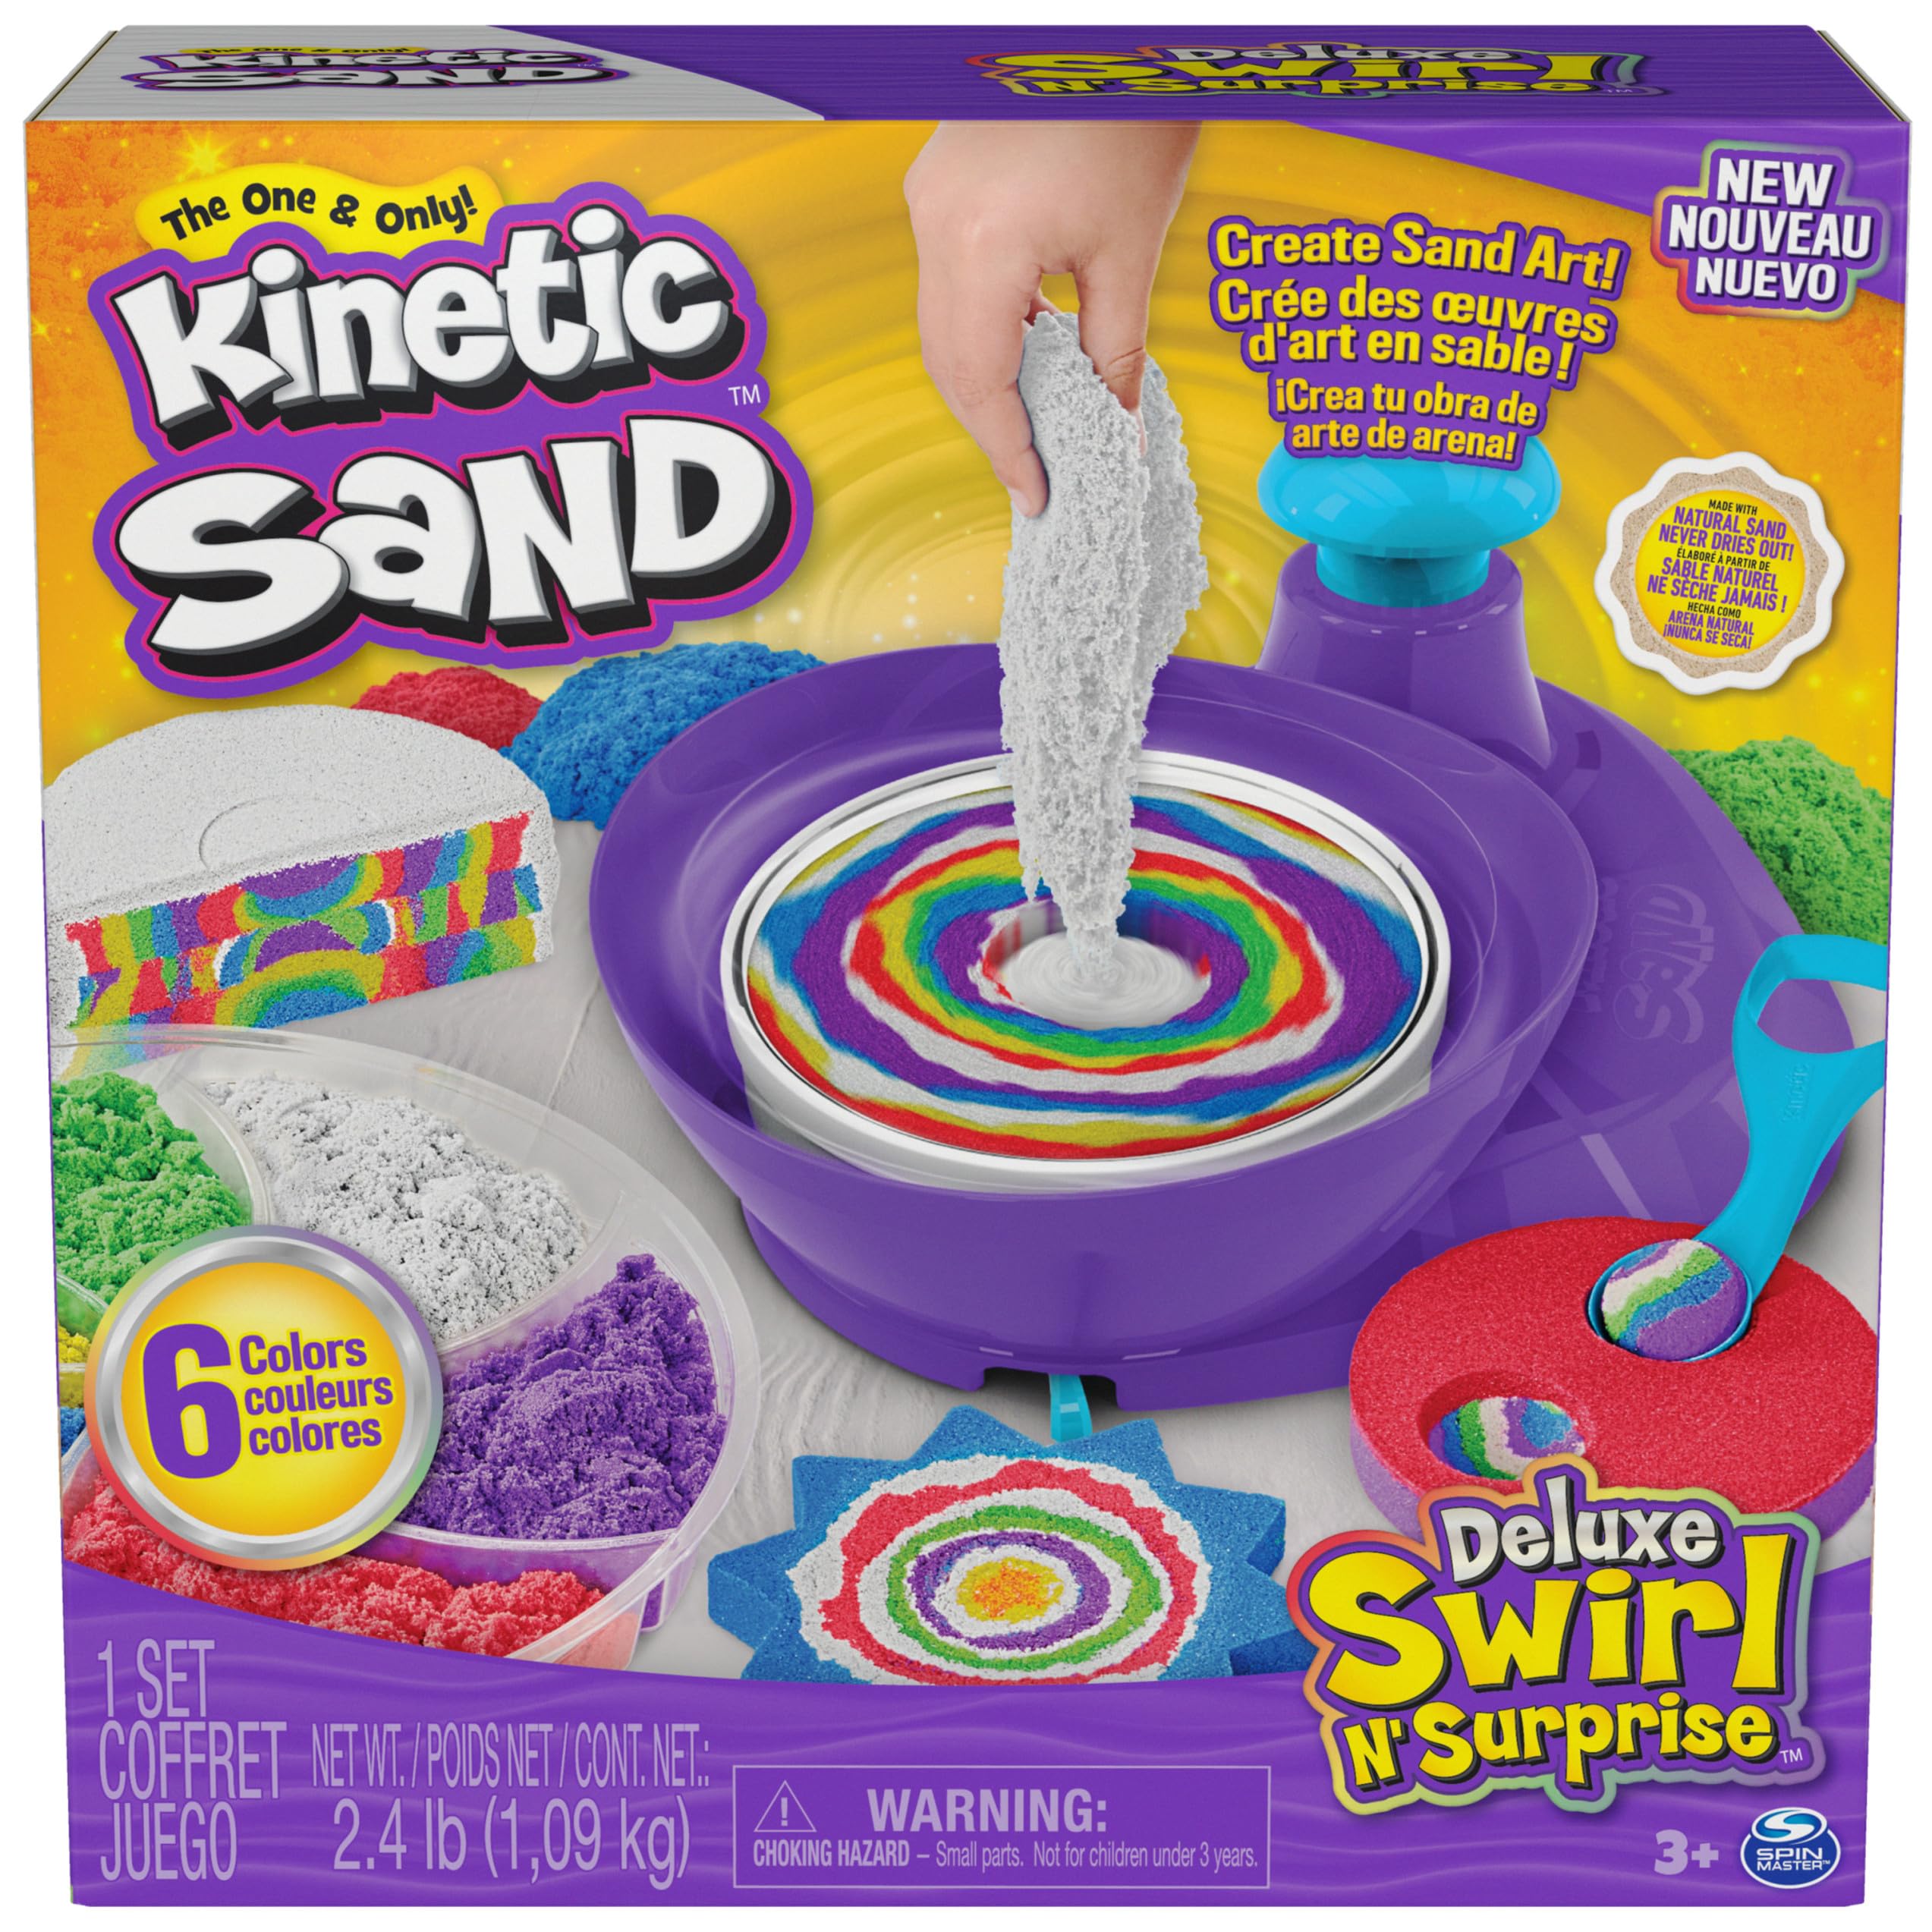 2.5-Lbs Kinetic Sand Deluxe Swirl N' Surprise Toy Playset w/ 4 Tools $12.80 + Free Shipping w/ Prime or on $35+